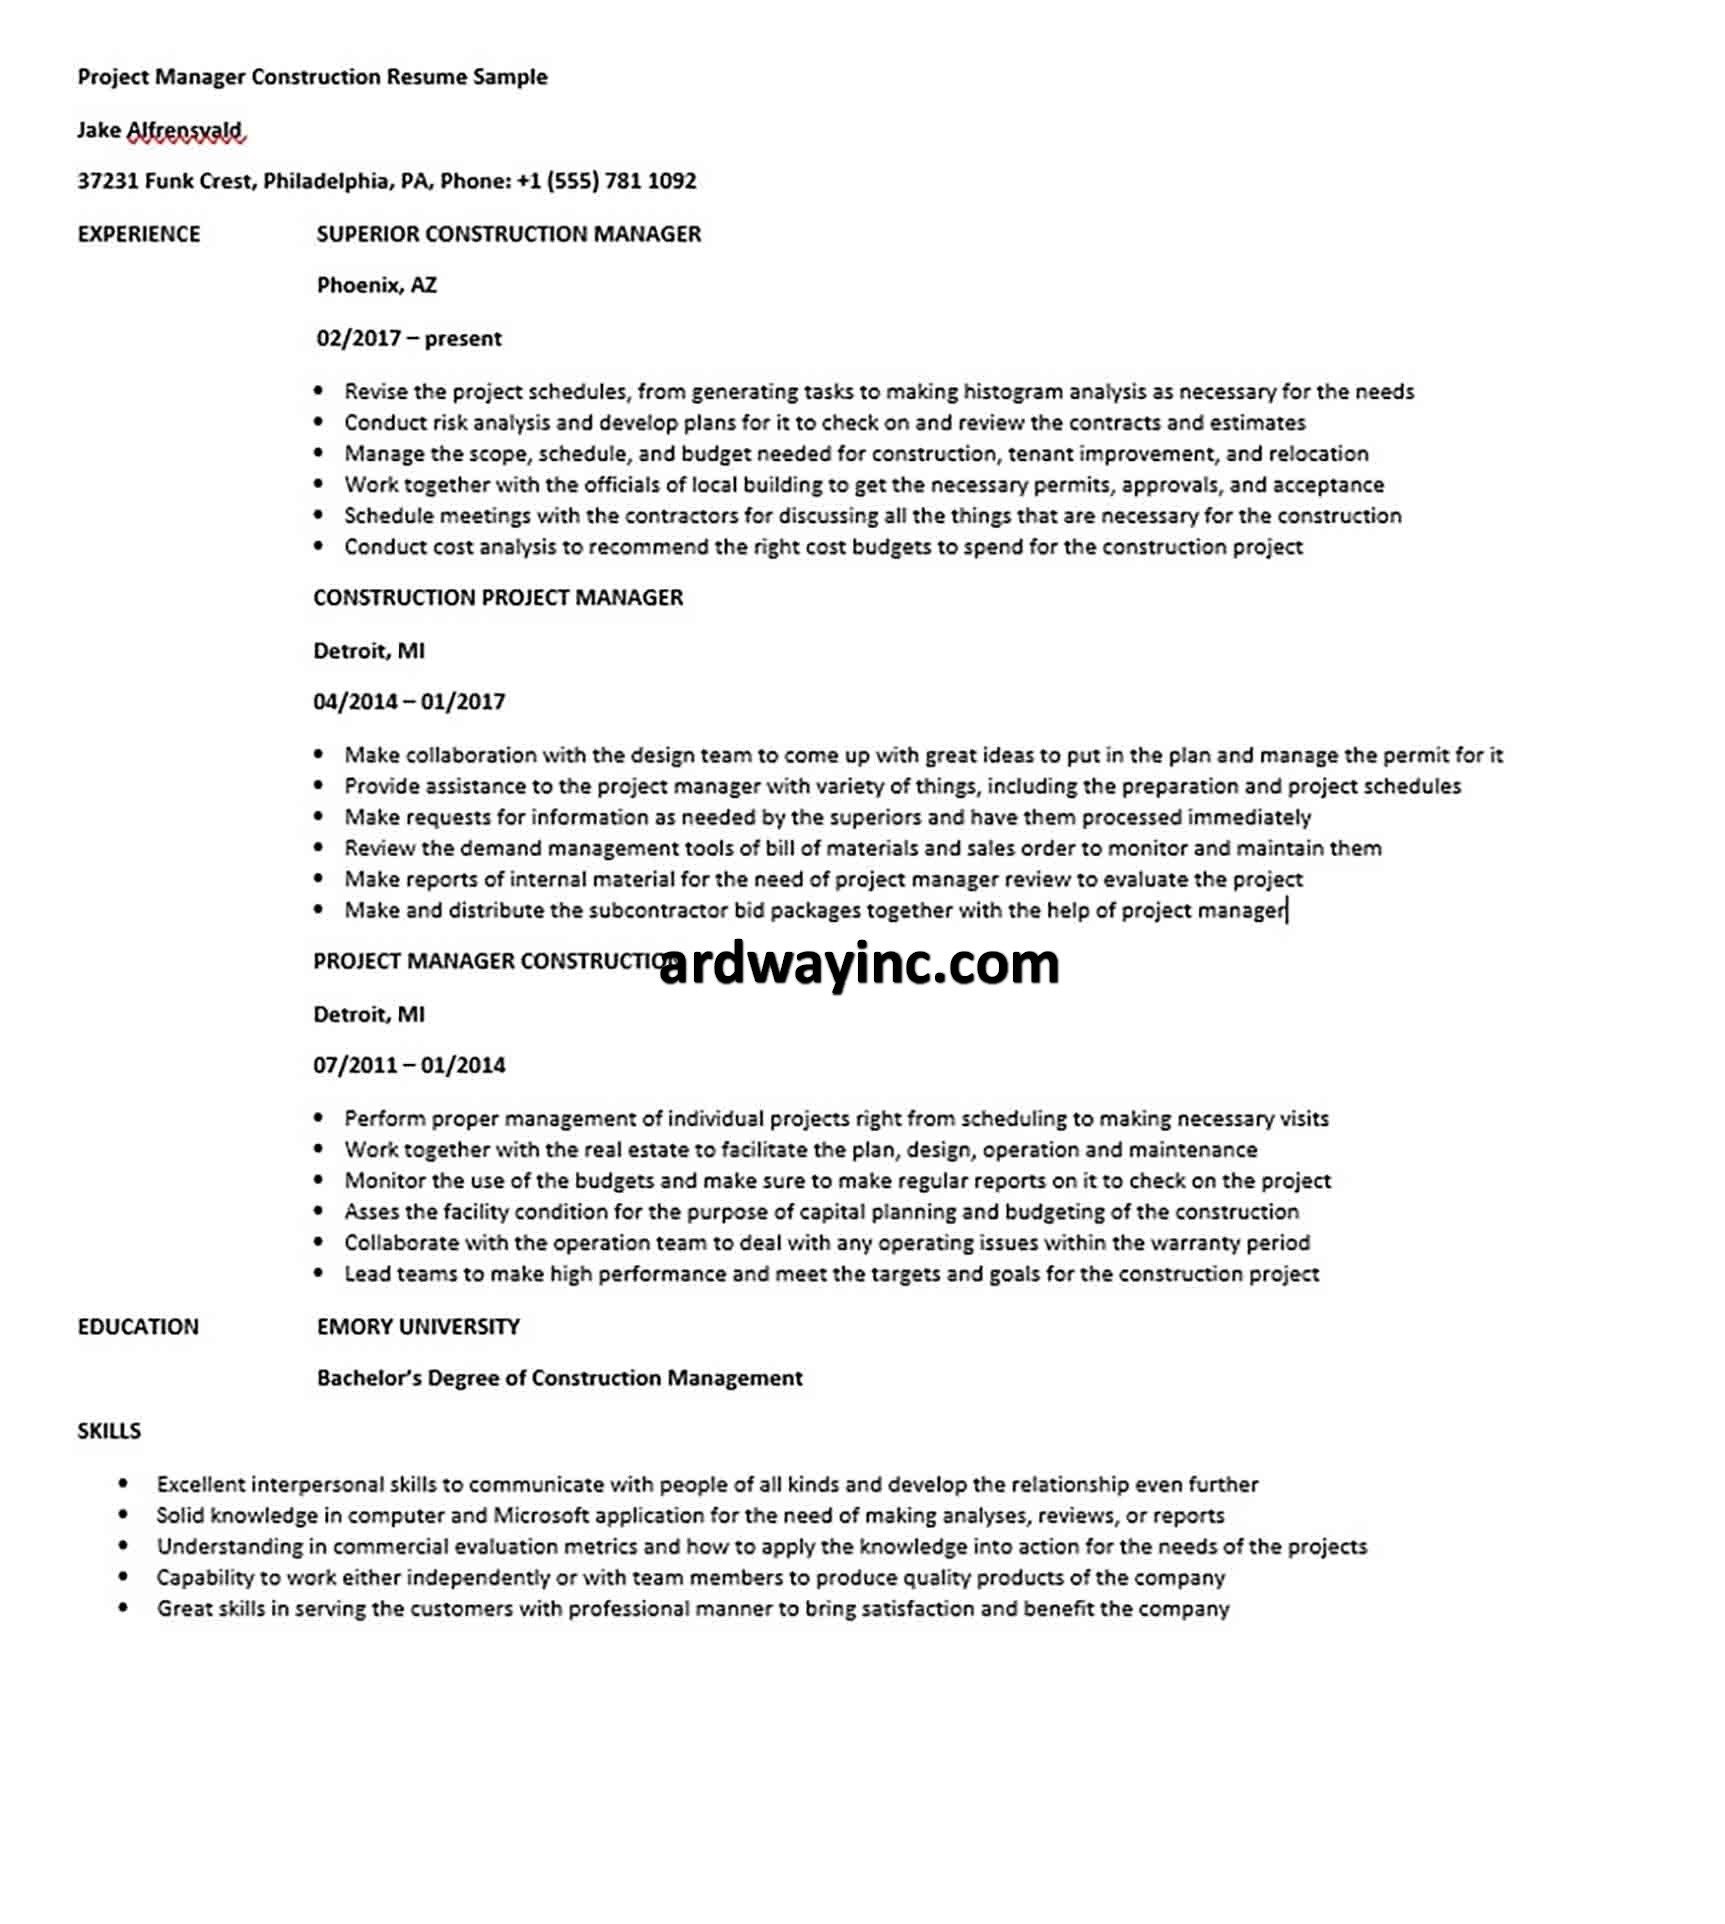 Project Manager Construction Resume Sample